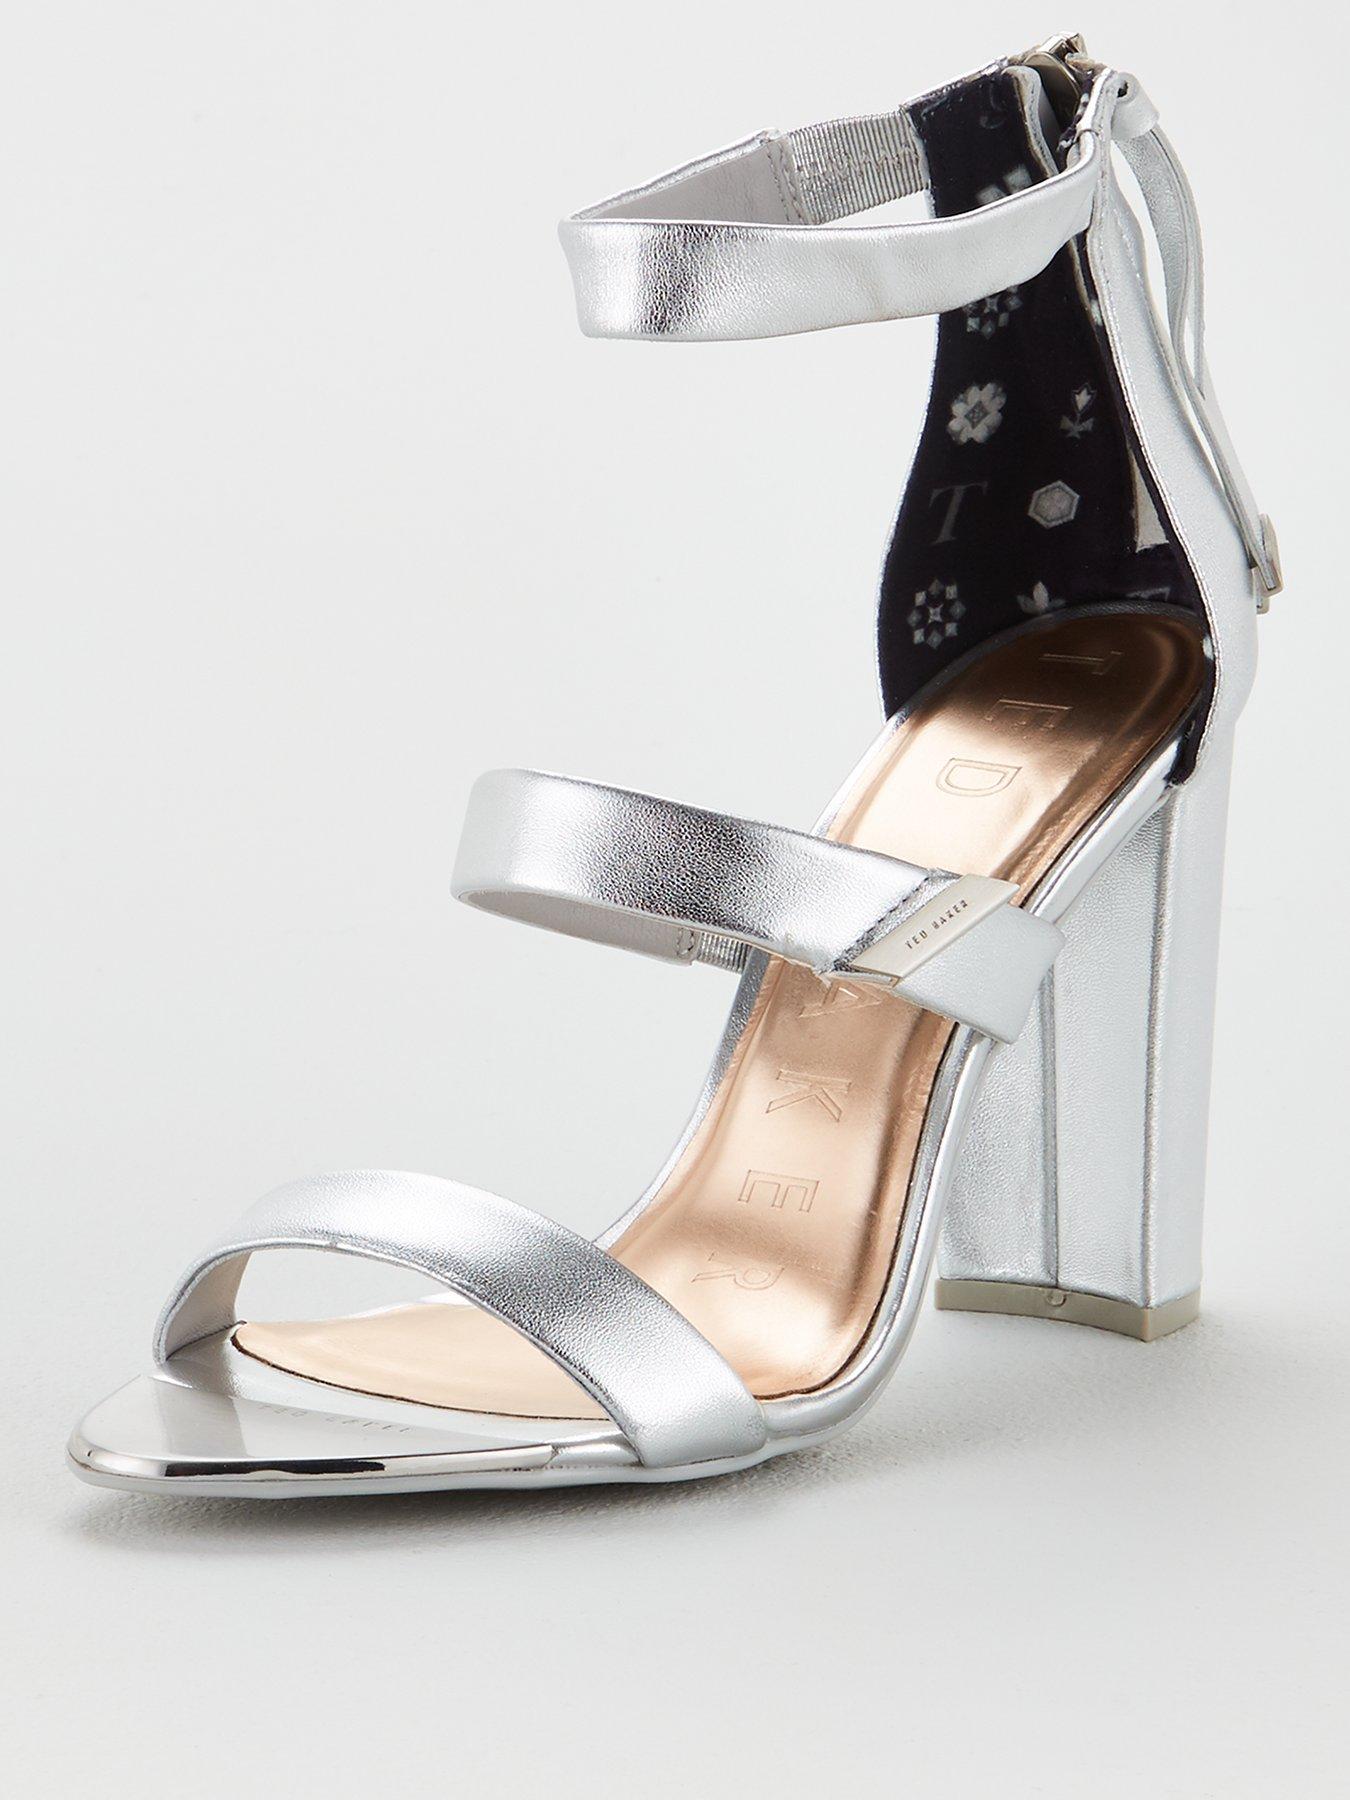 ted baker silver boots